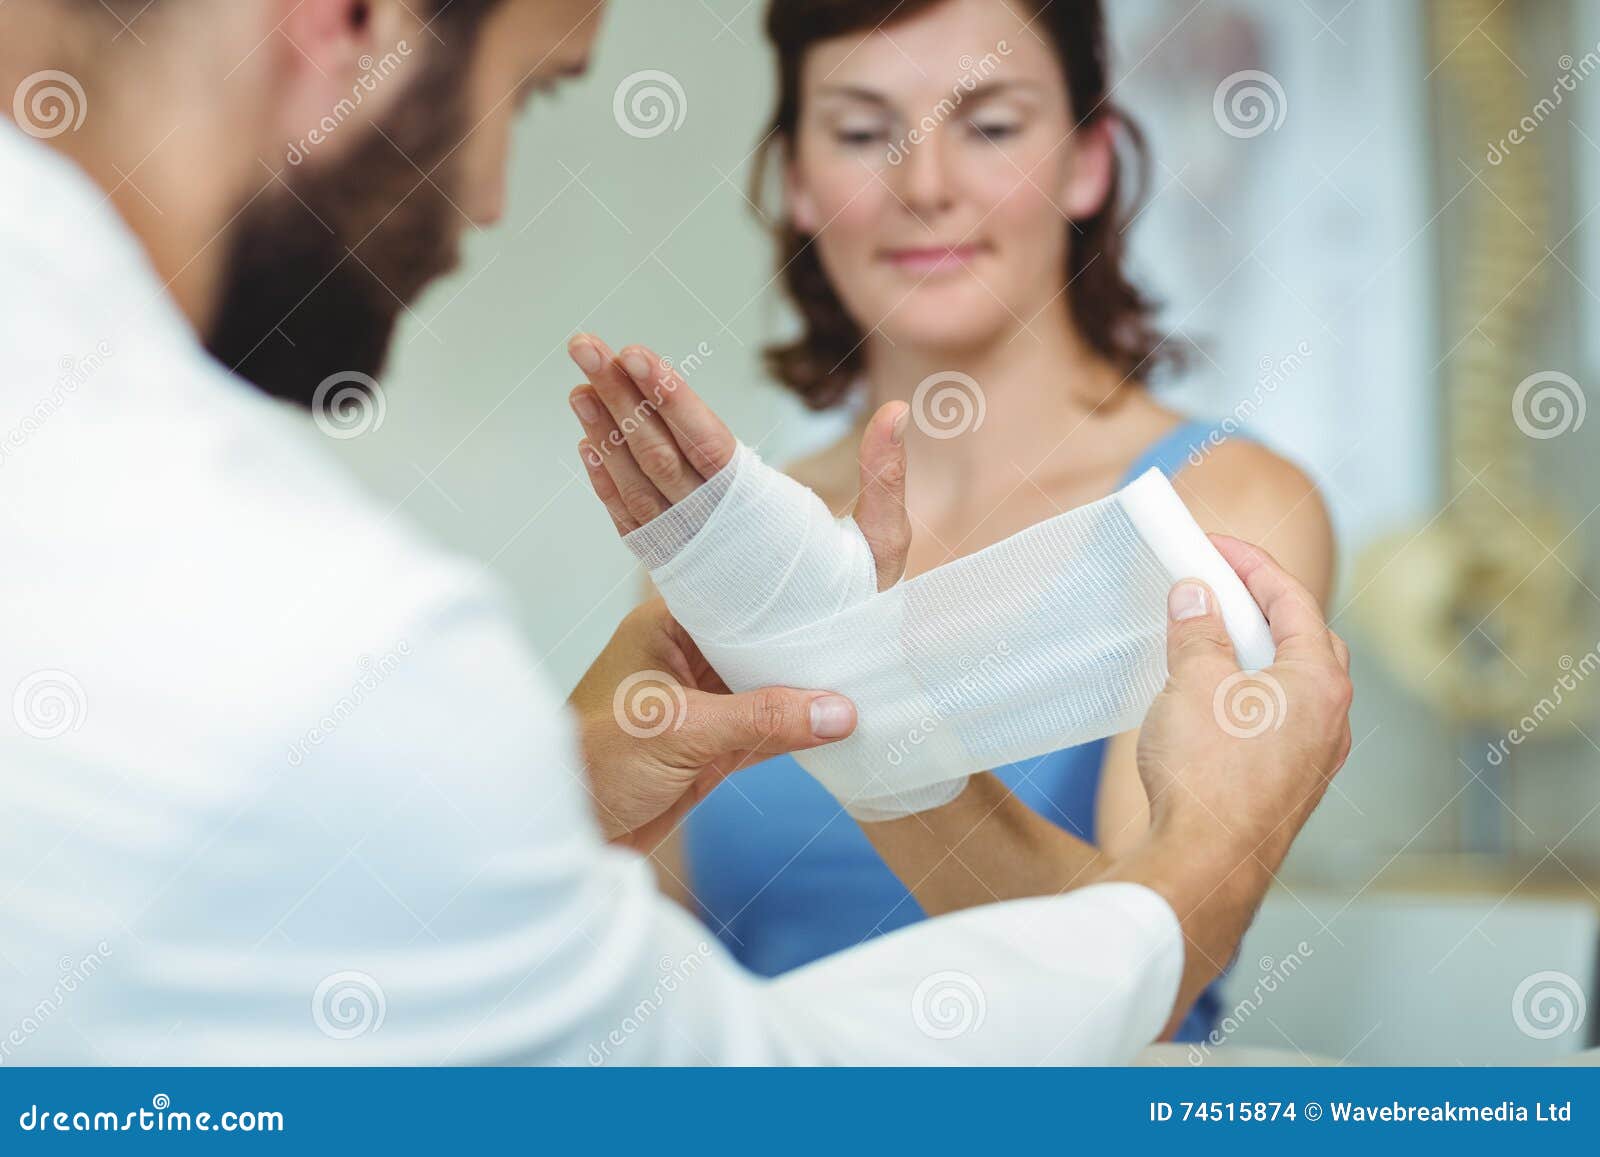 physiotherapist putting bandage on injured hand of patient